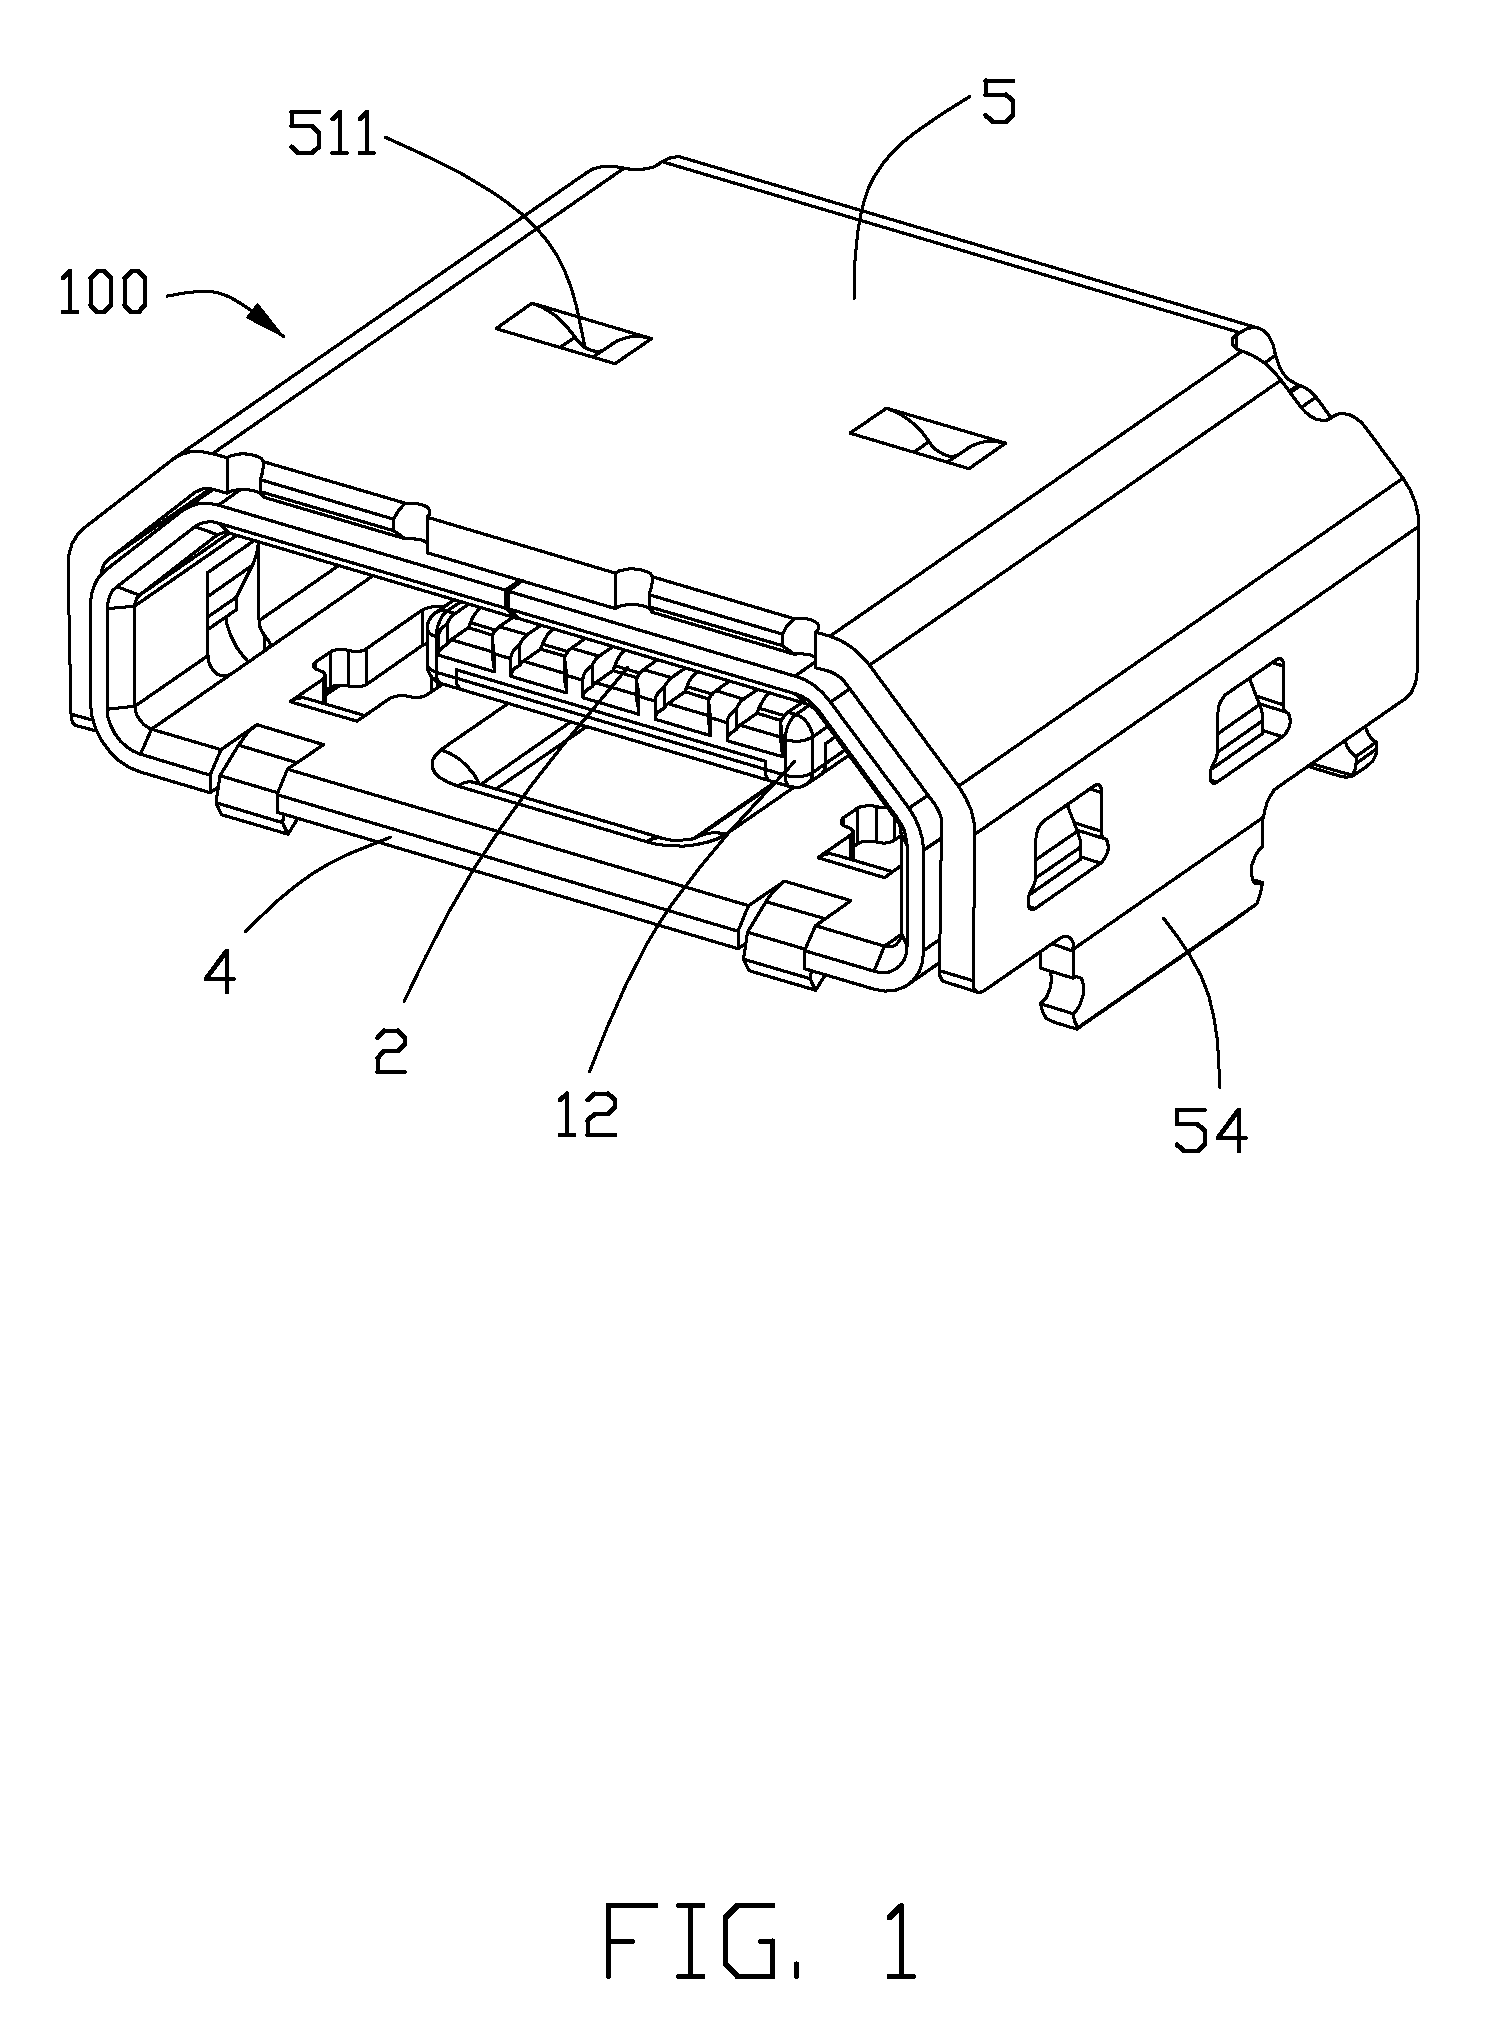 Electrical connector with a metal plate for preventing electromagnetic interference